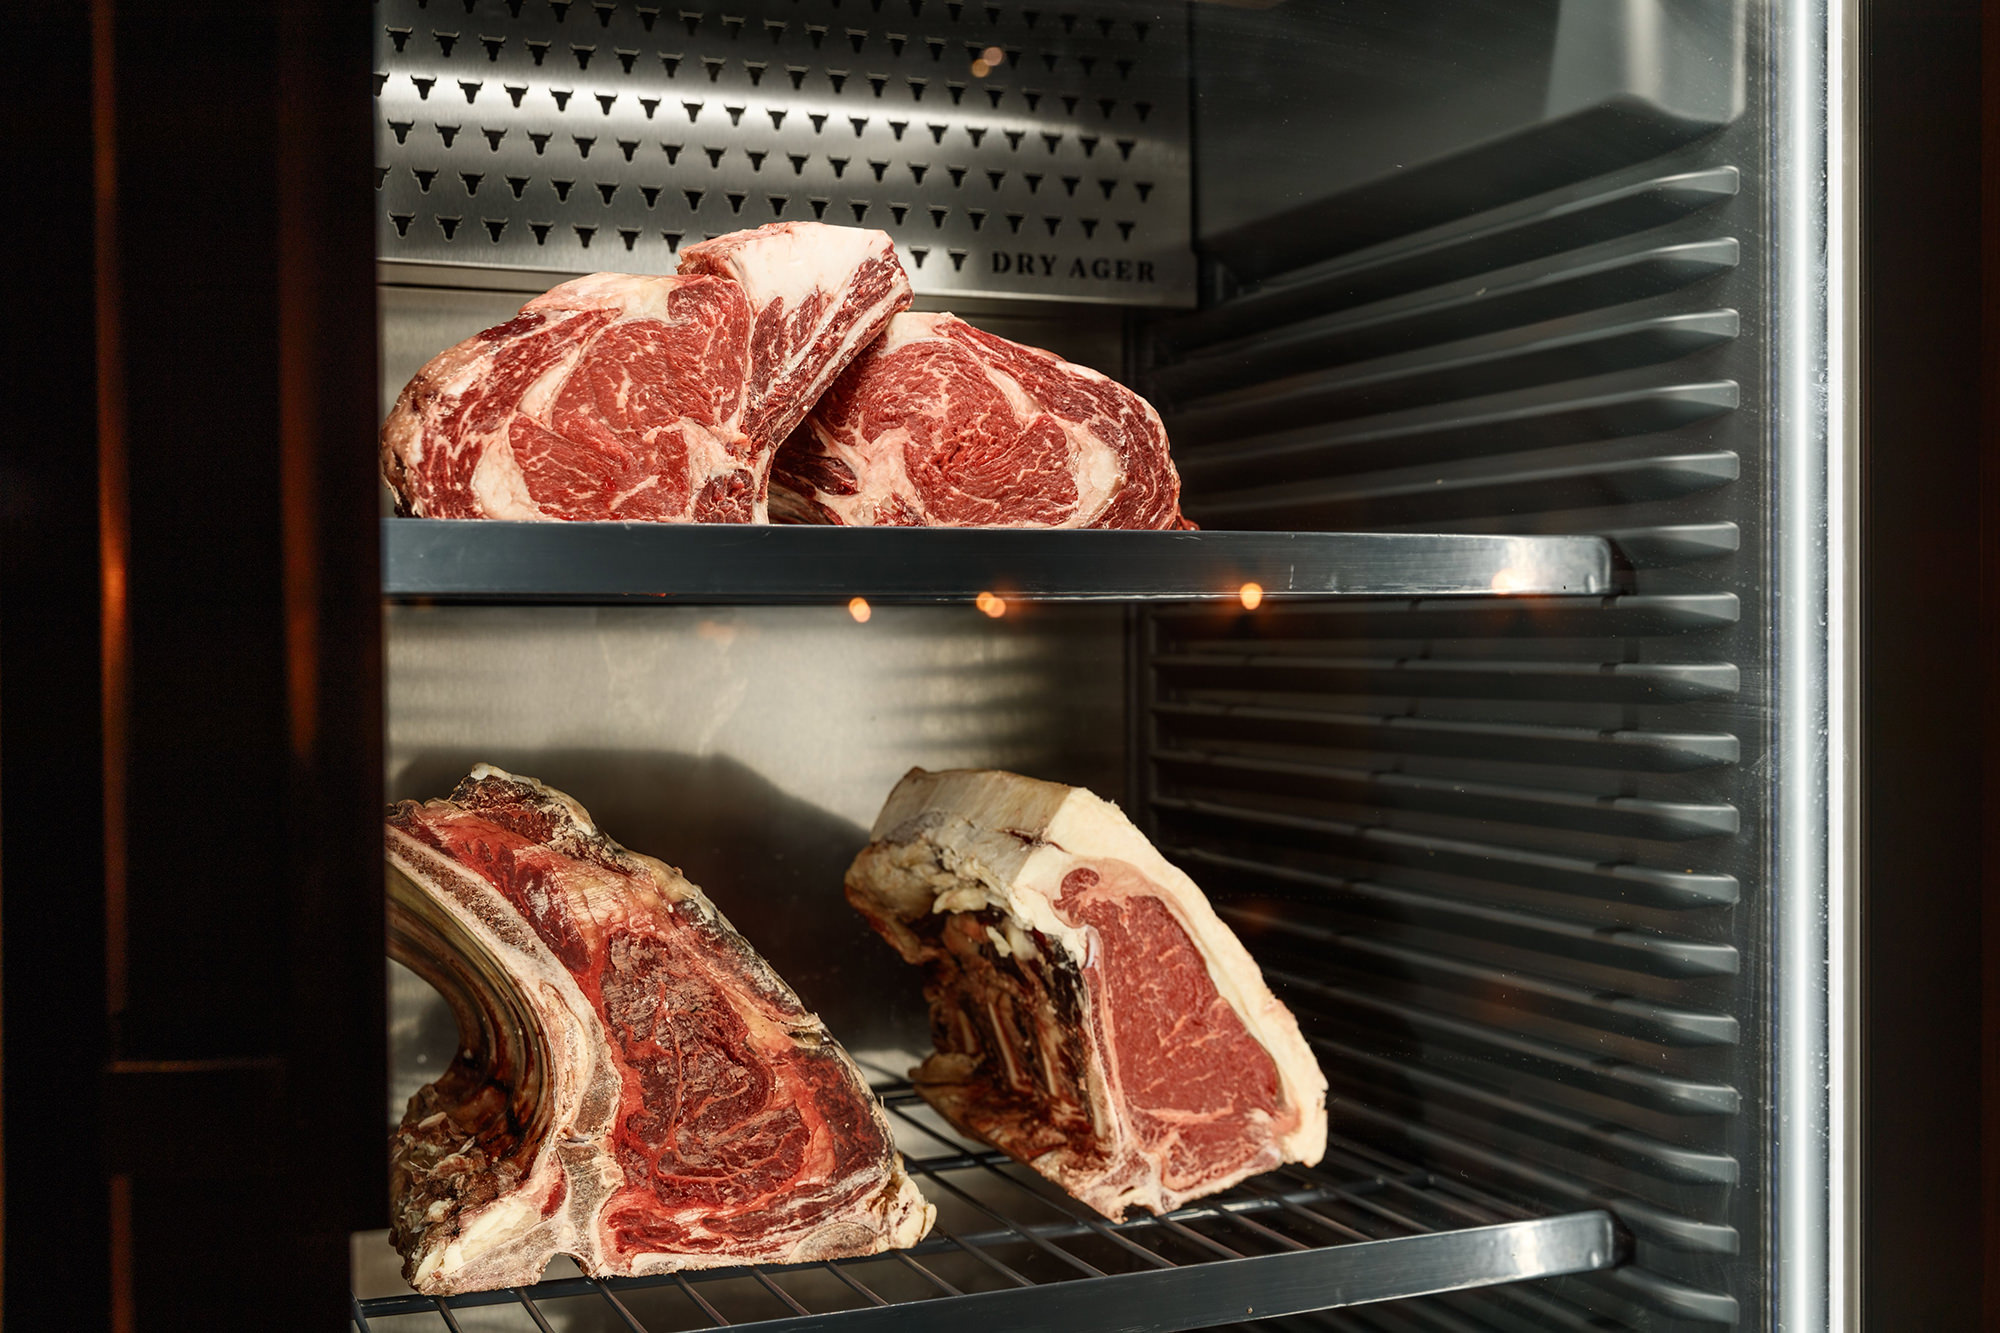 Western Sydney University beef in the Royal’s purpose-built dry age cabinet. 